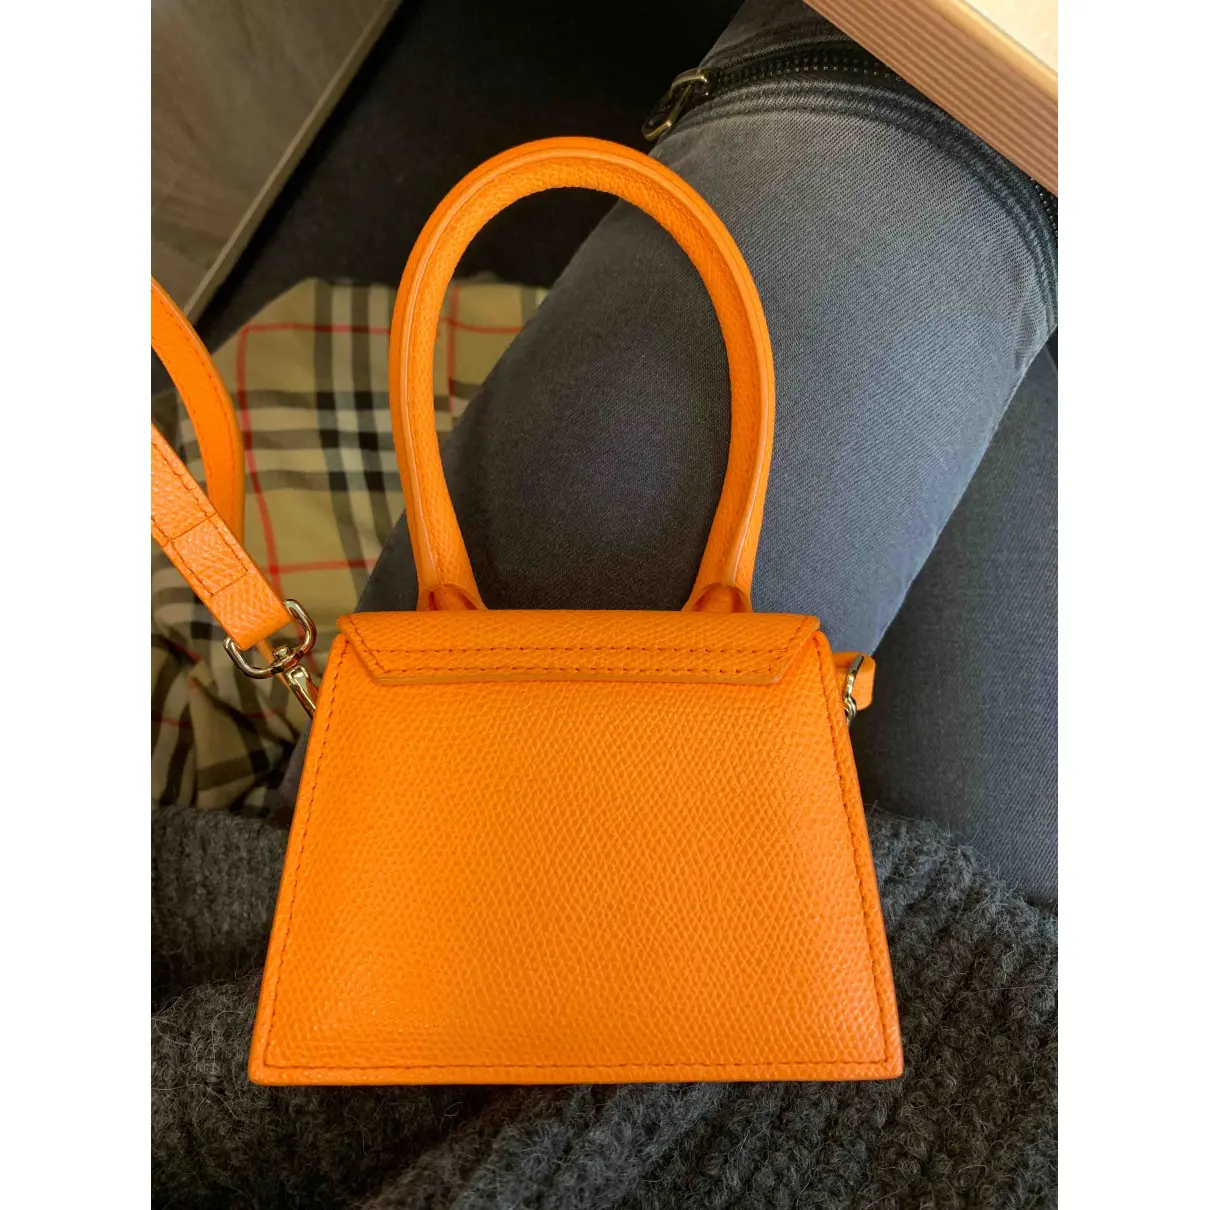 Buy Jacquemus Chiquito leather crossbody bag online